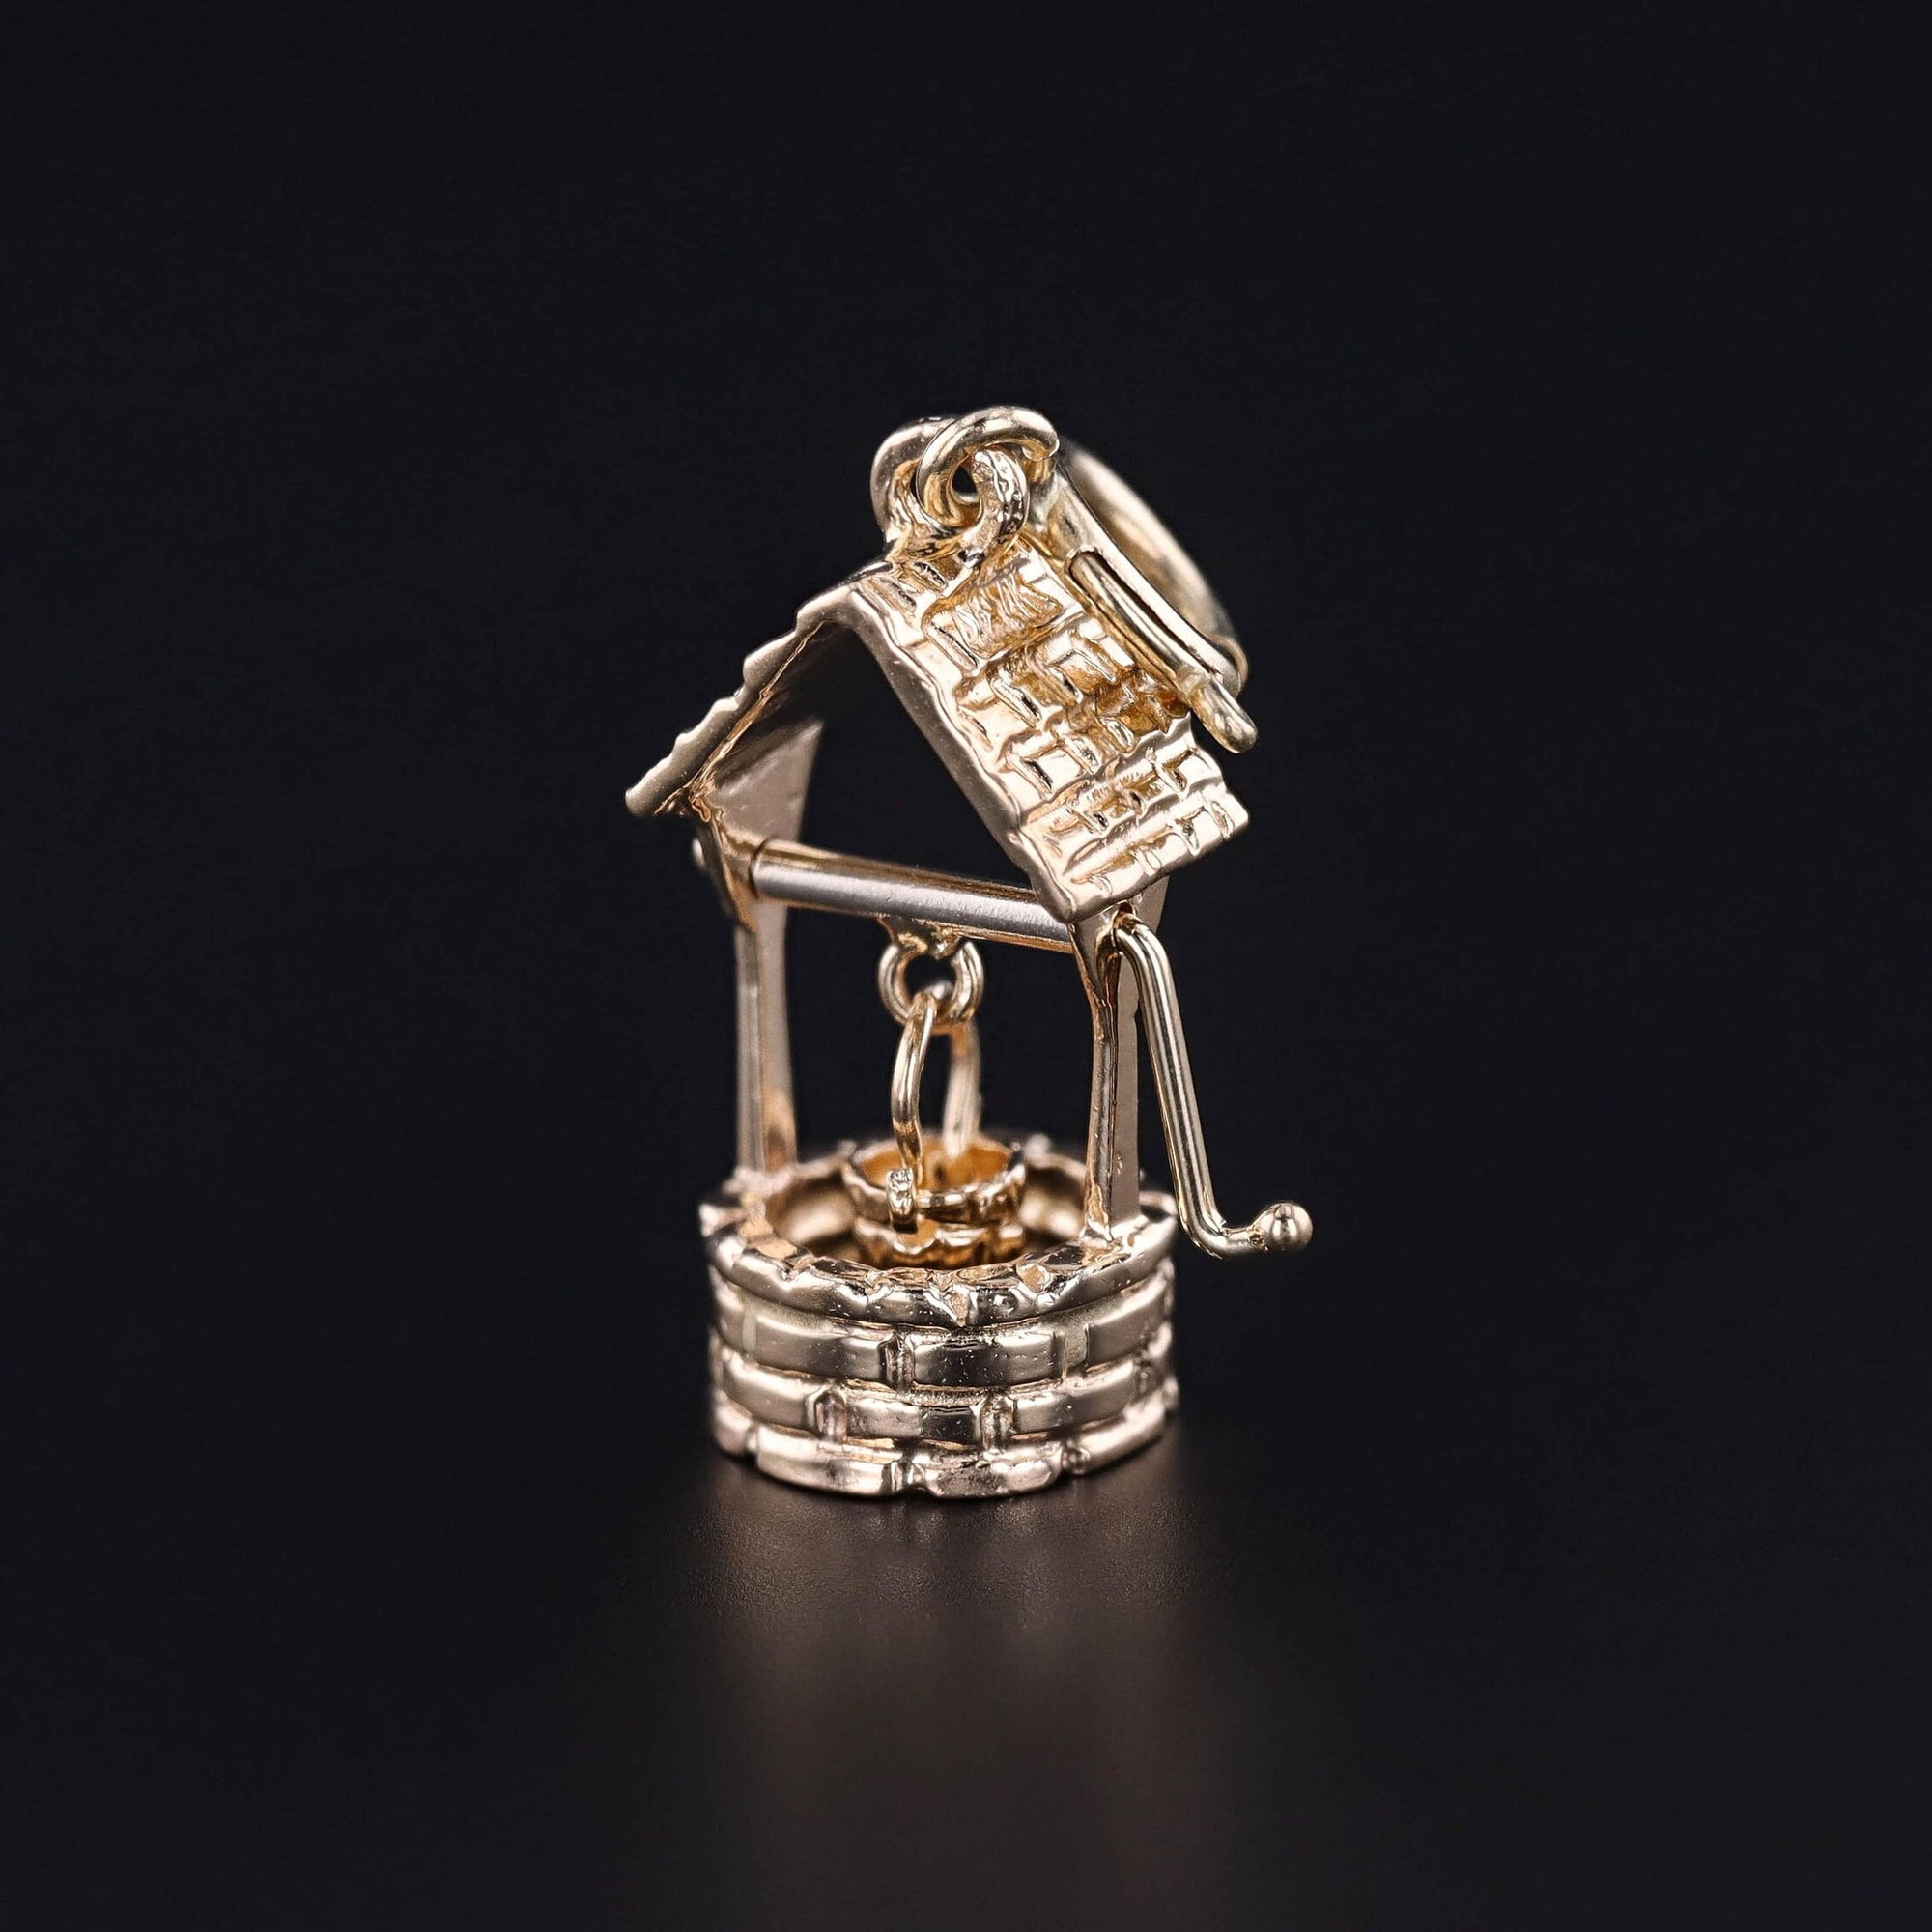 Vintage Wishing Well Charm of 14k Gold